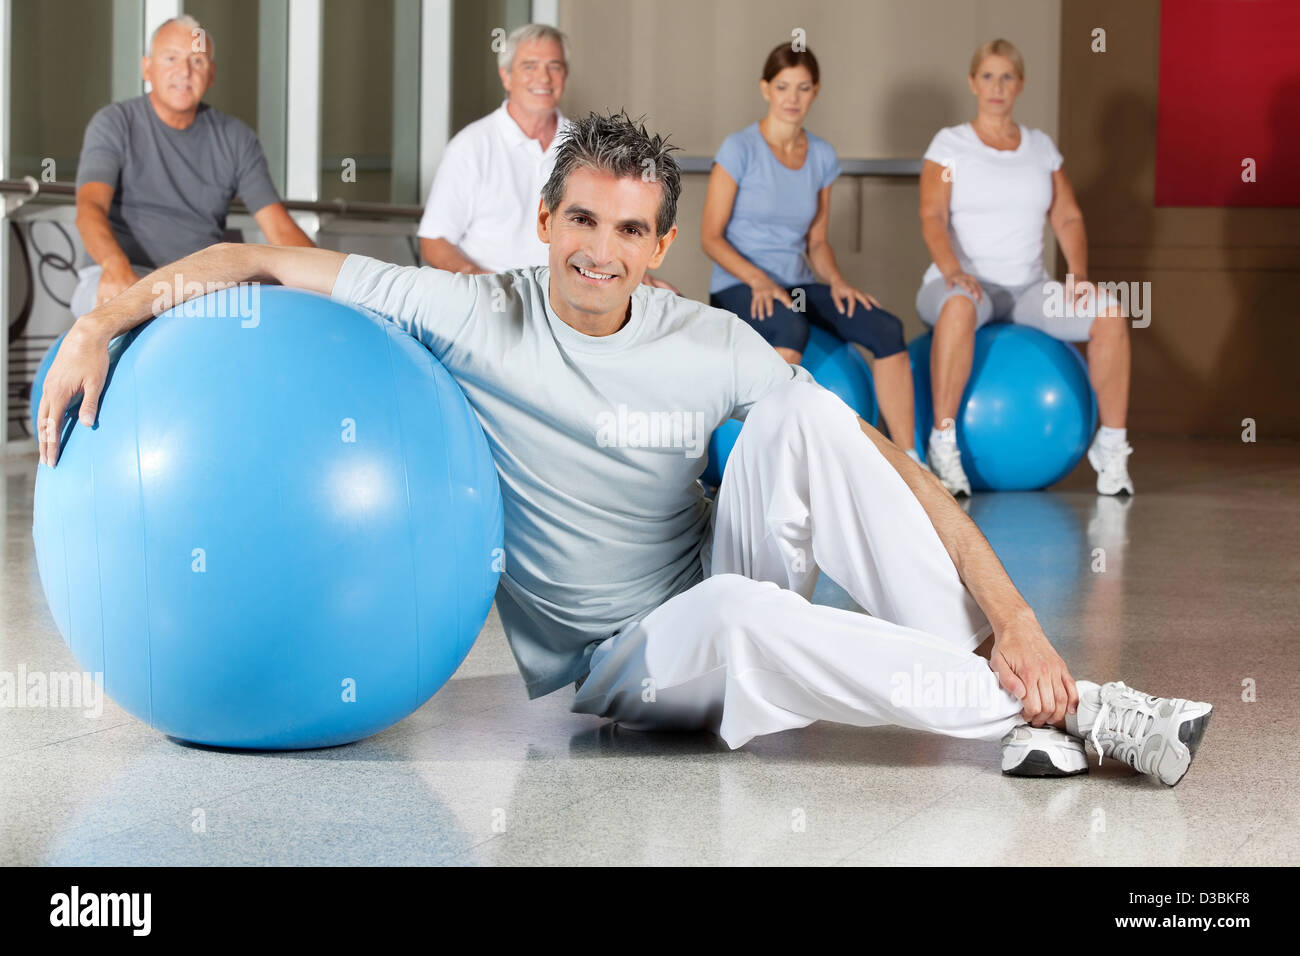 Happy man sitting with blue gym ball in fitness center with senior group Stock Photo